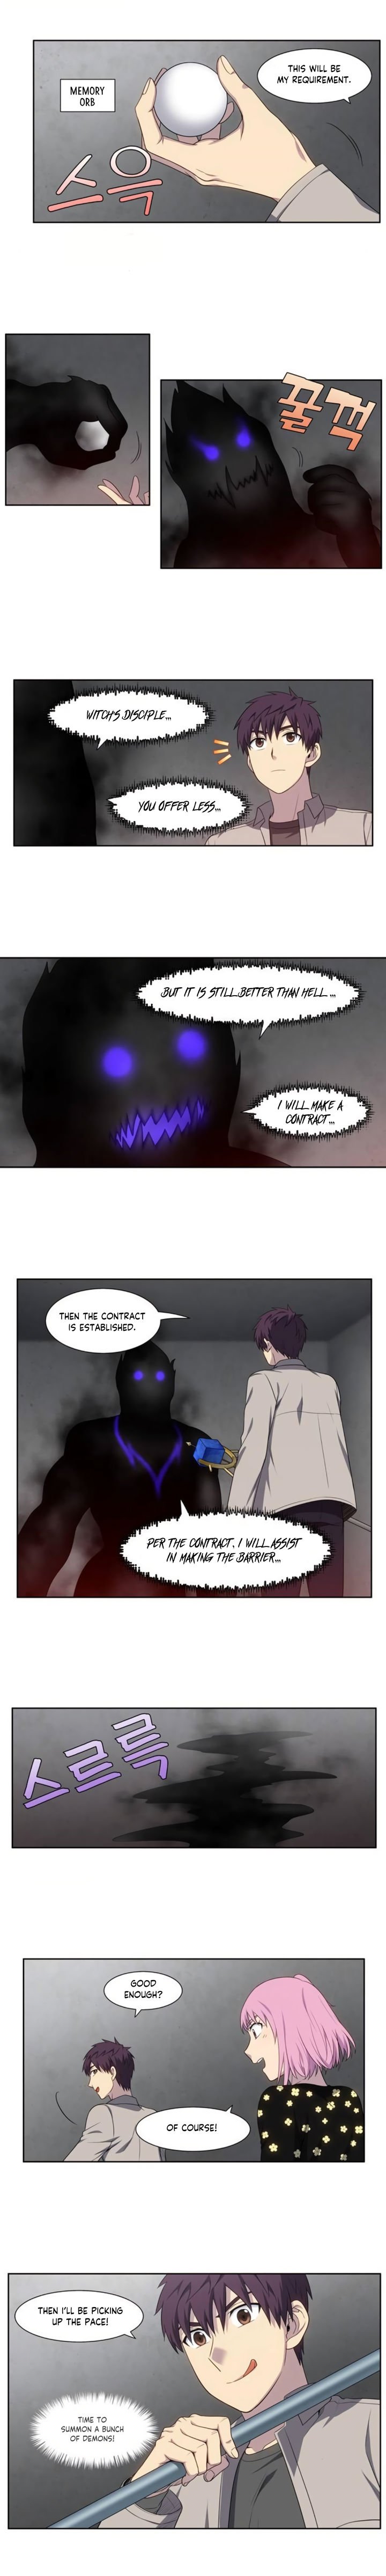 the-gamer-chap-357-4